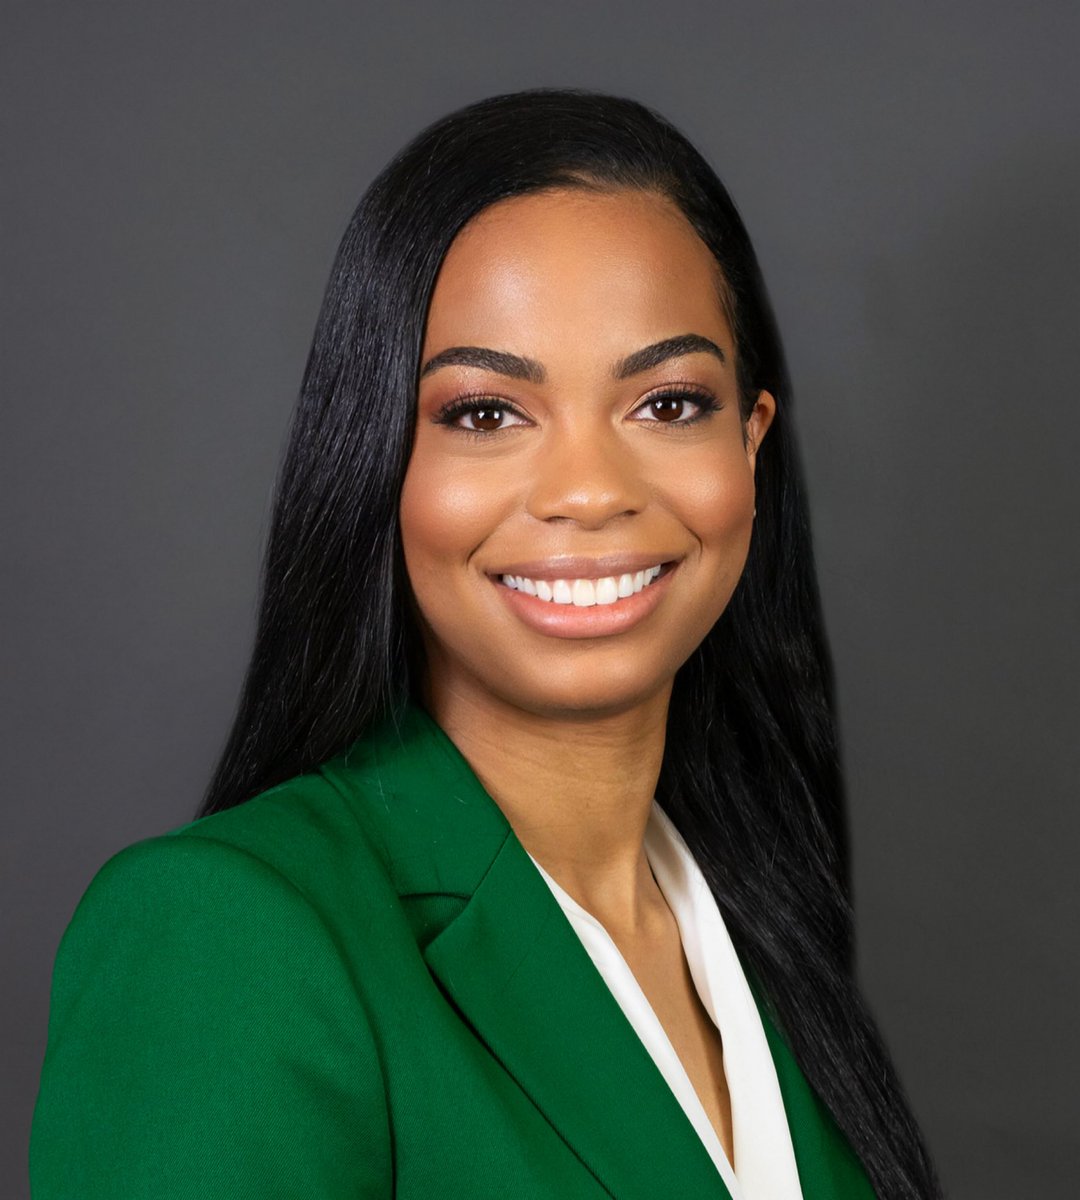 Hey #MedTwitter! Let me reintroduce myself! I’m Tanisha Fleming, call me T, an MS4 from @LSUHS applying #generalsurgery !
Interested in Trauma and Vascular Surgery.

Love to go to brunch 🥂, watch a good documentary, and spend time with my family. #Match2024